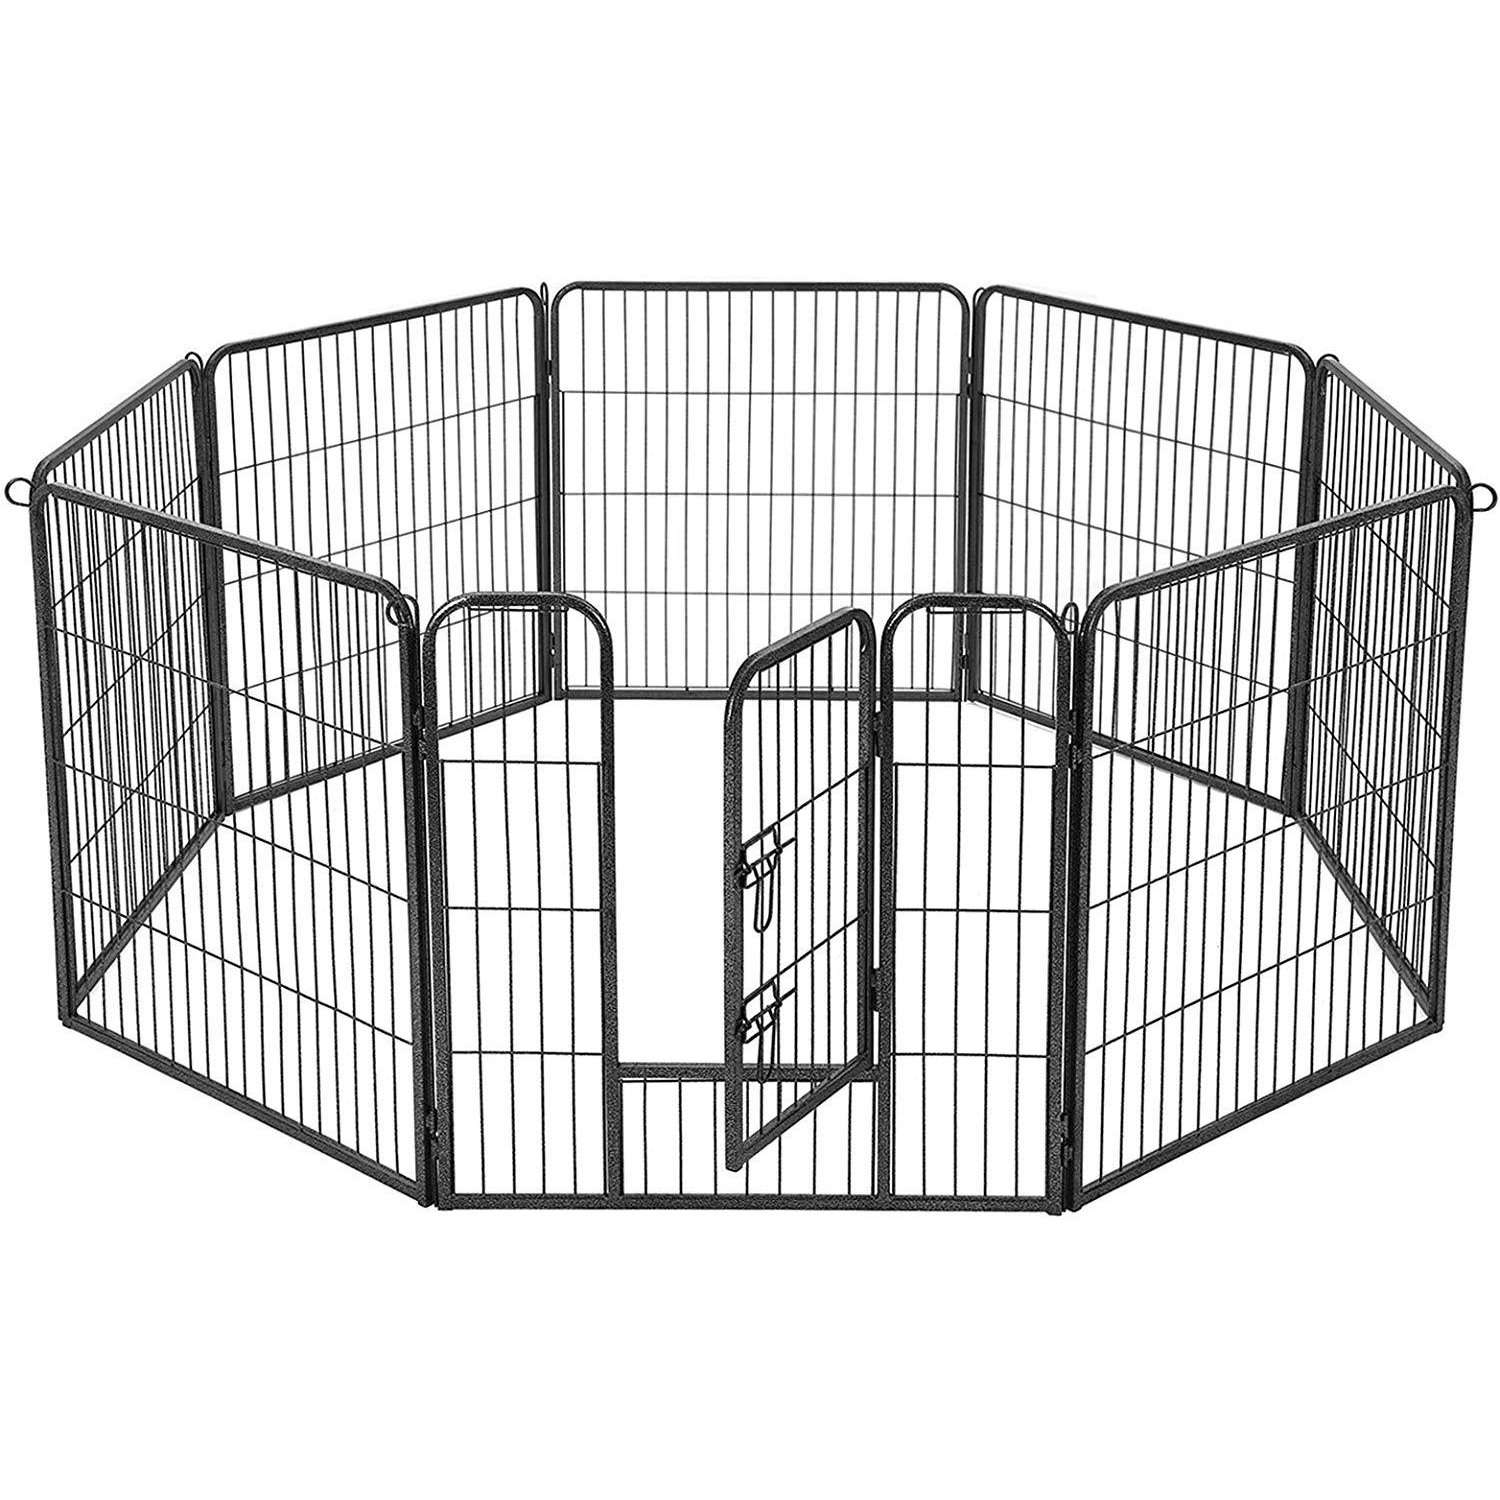 Nancy's Dog Crate - Dog Crate - Dog Kennel - Pet Playpen - Dog Daycare for Dogs